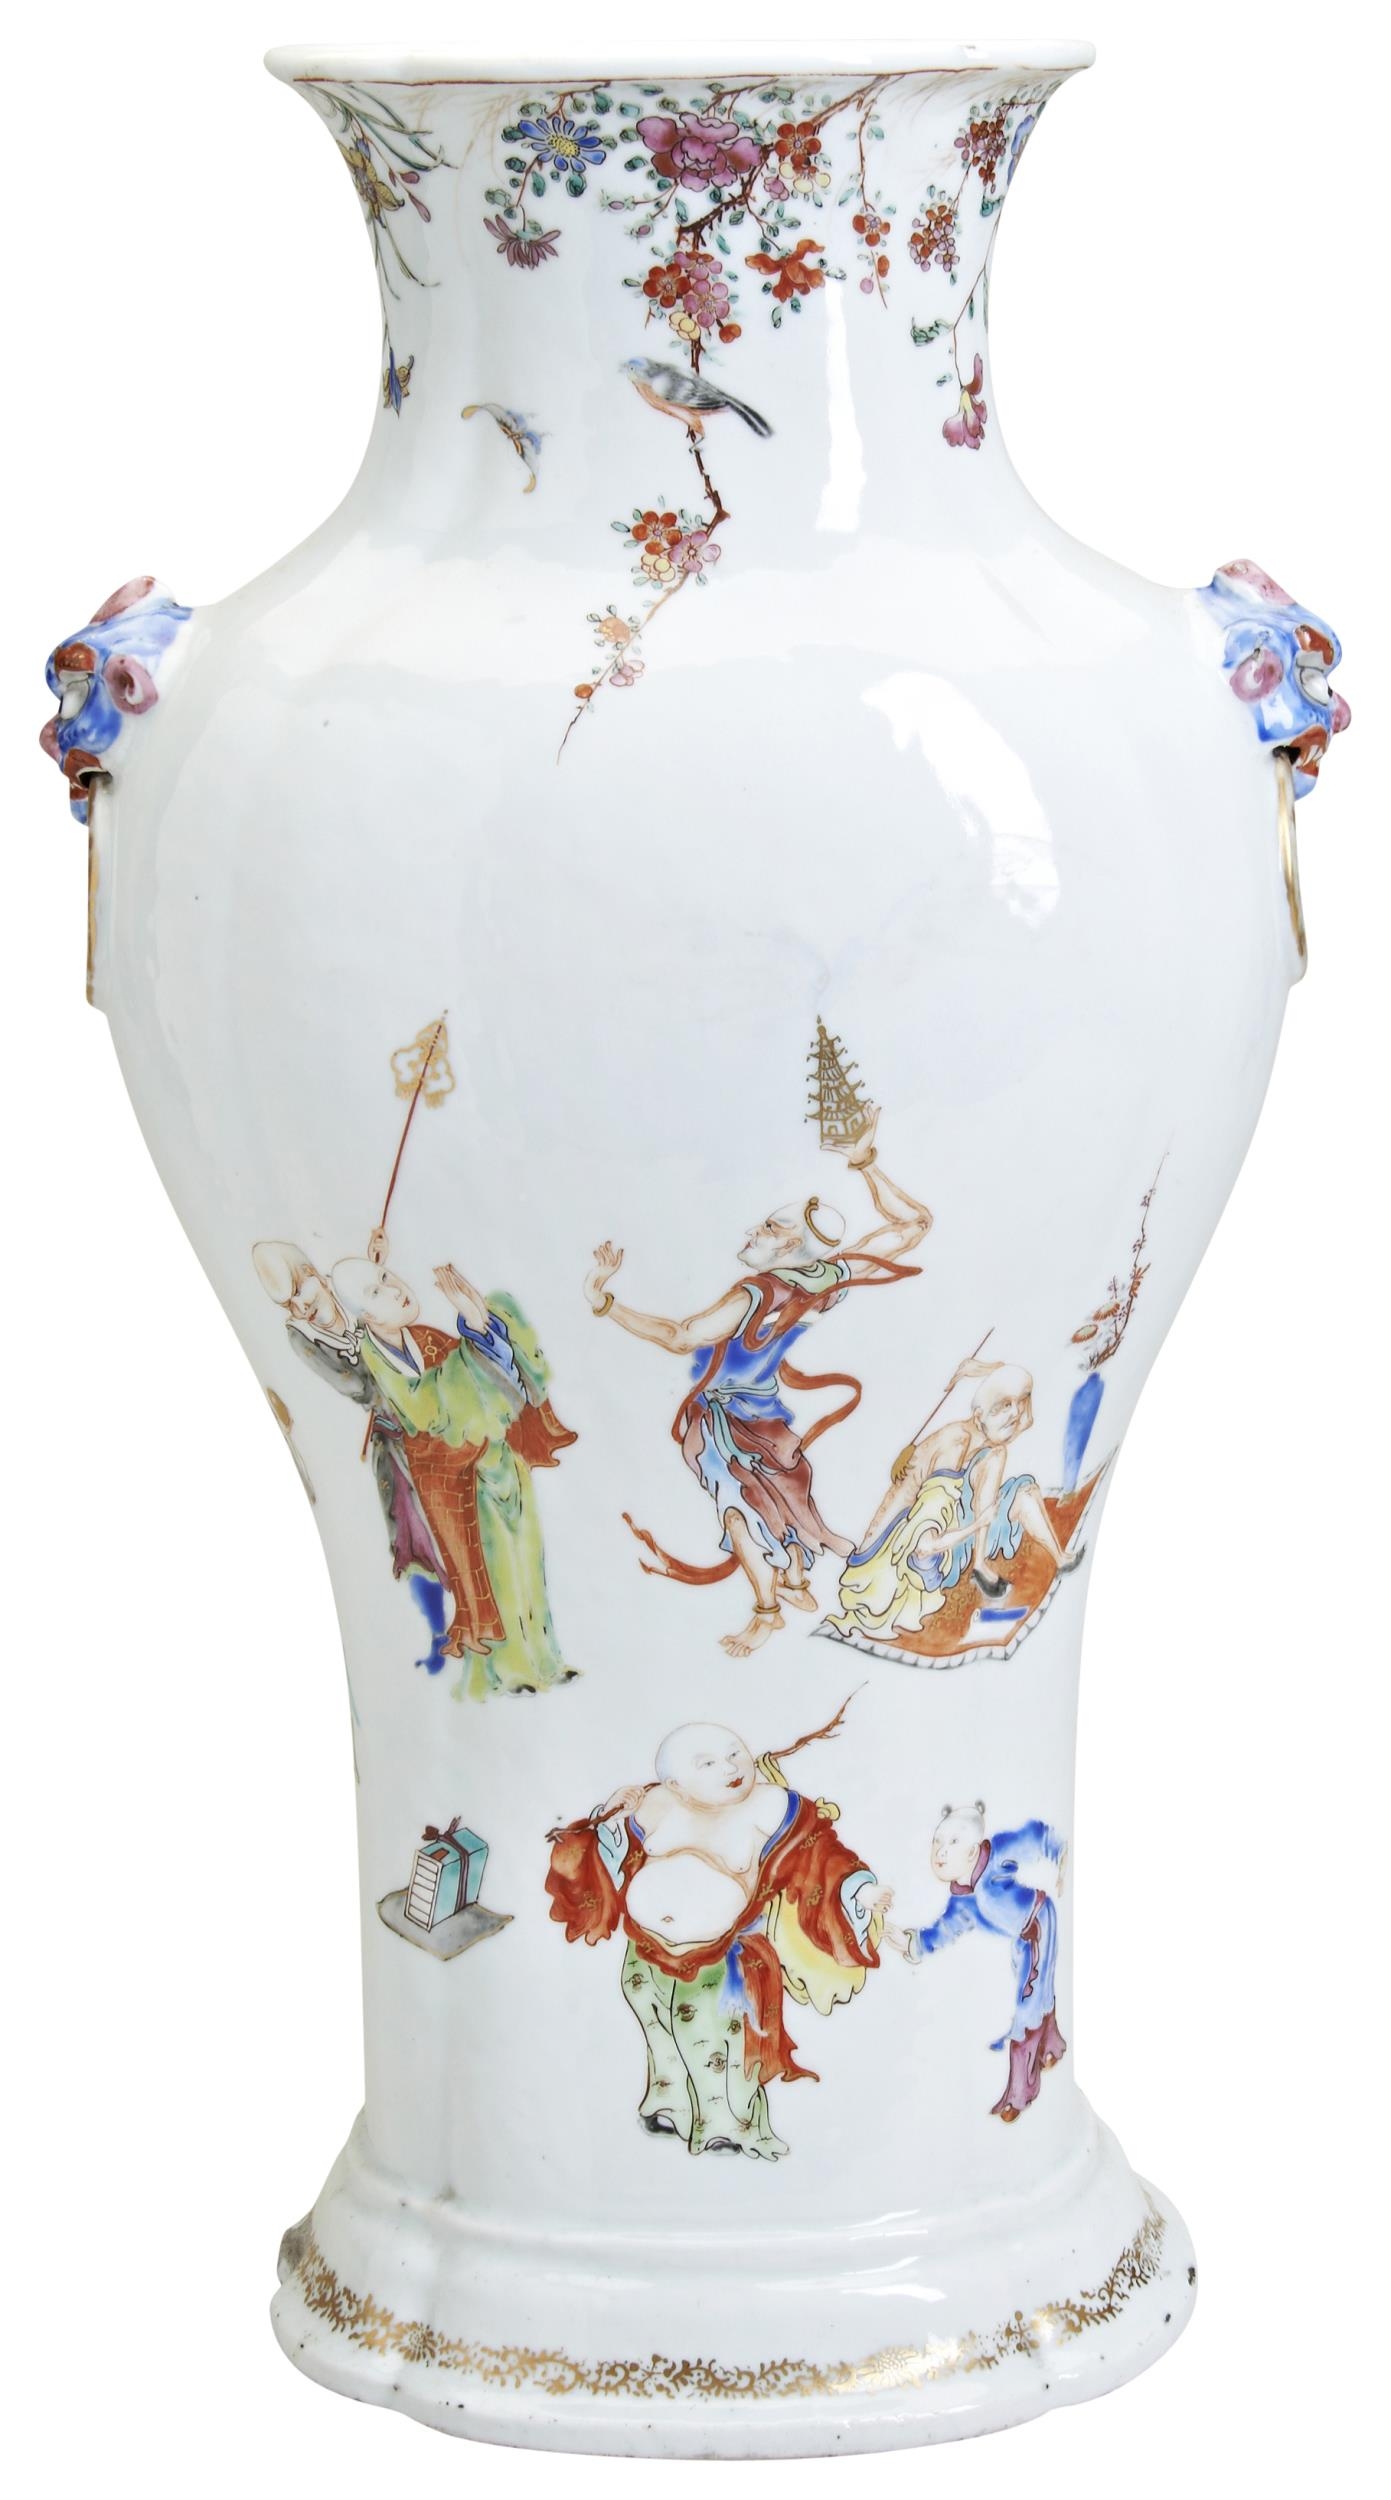 A LARGE FAMILLE ROSE BALUSTER VASE QIANLONG PERIOD (1736-1795) 清 乾隆粉彩 十八罗汉狮耳瓶 the moulded - Image 2 of 2